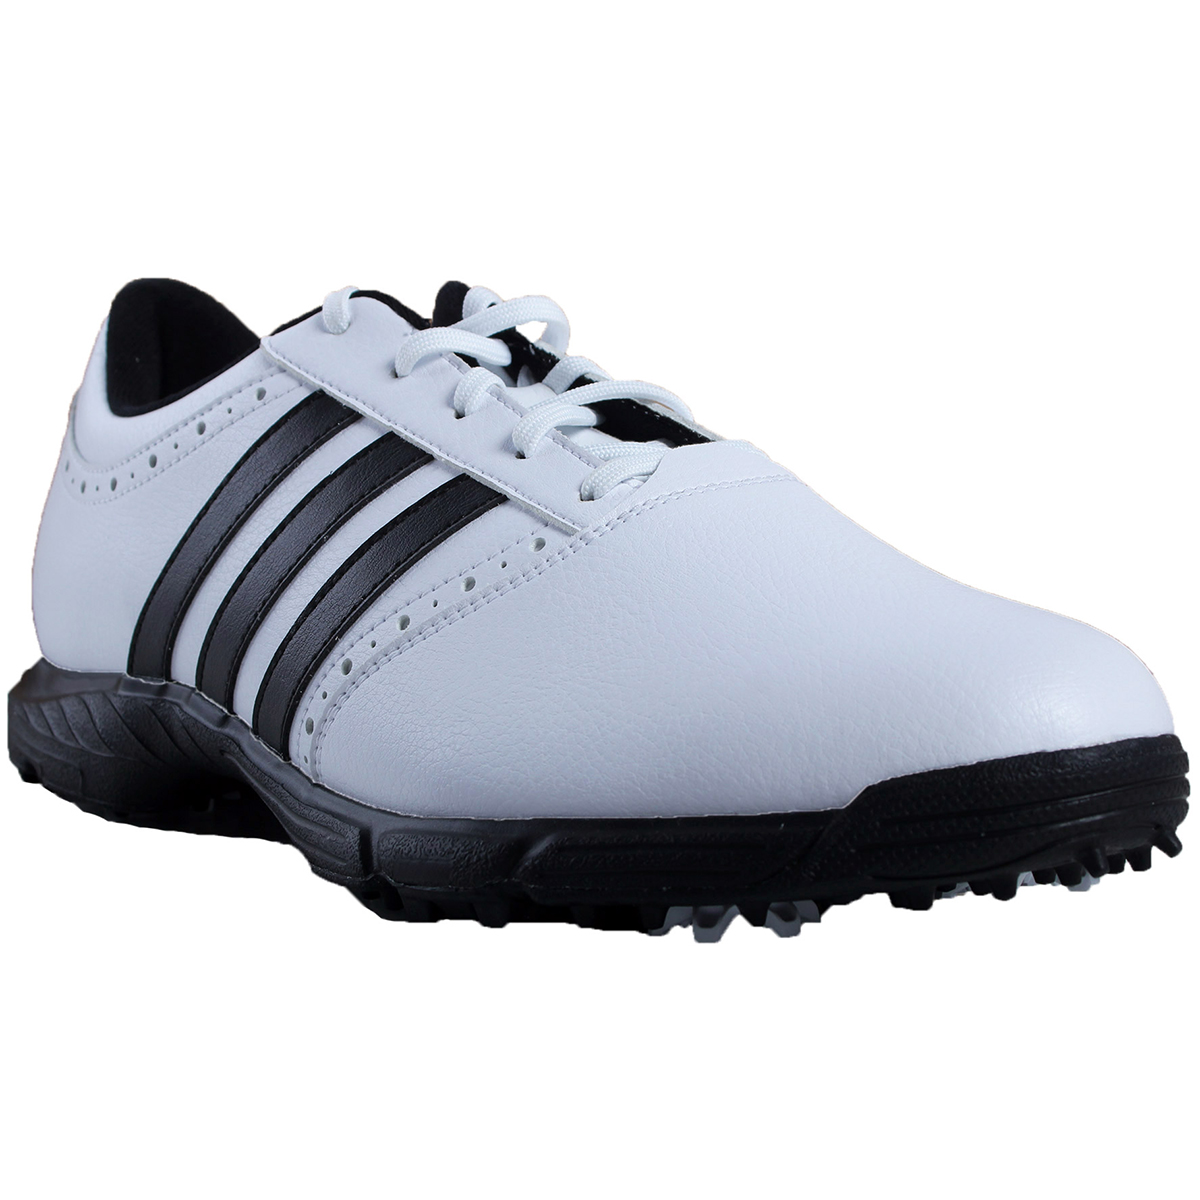 adidas traxion classic golf shoes review